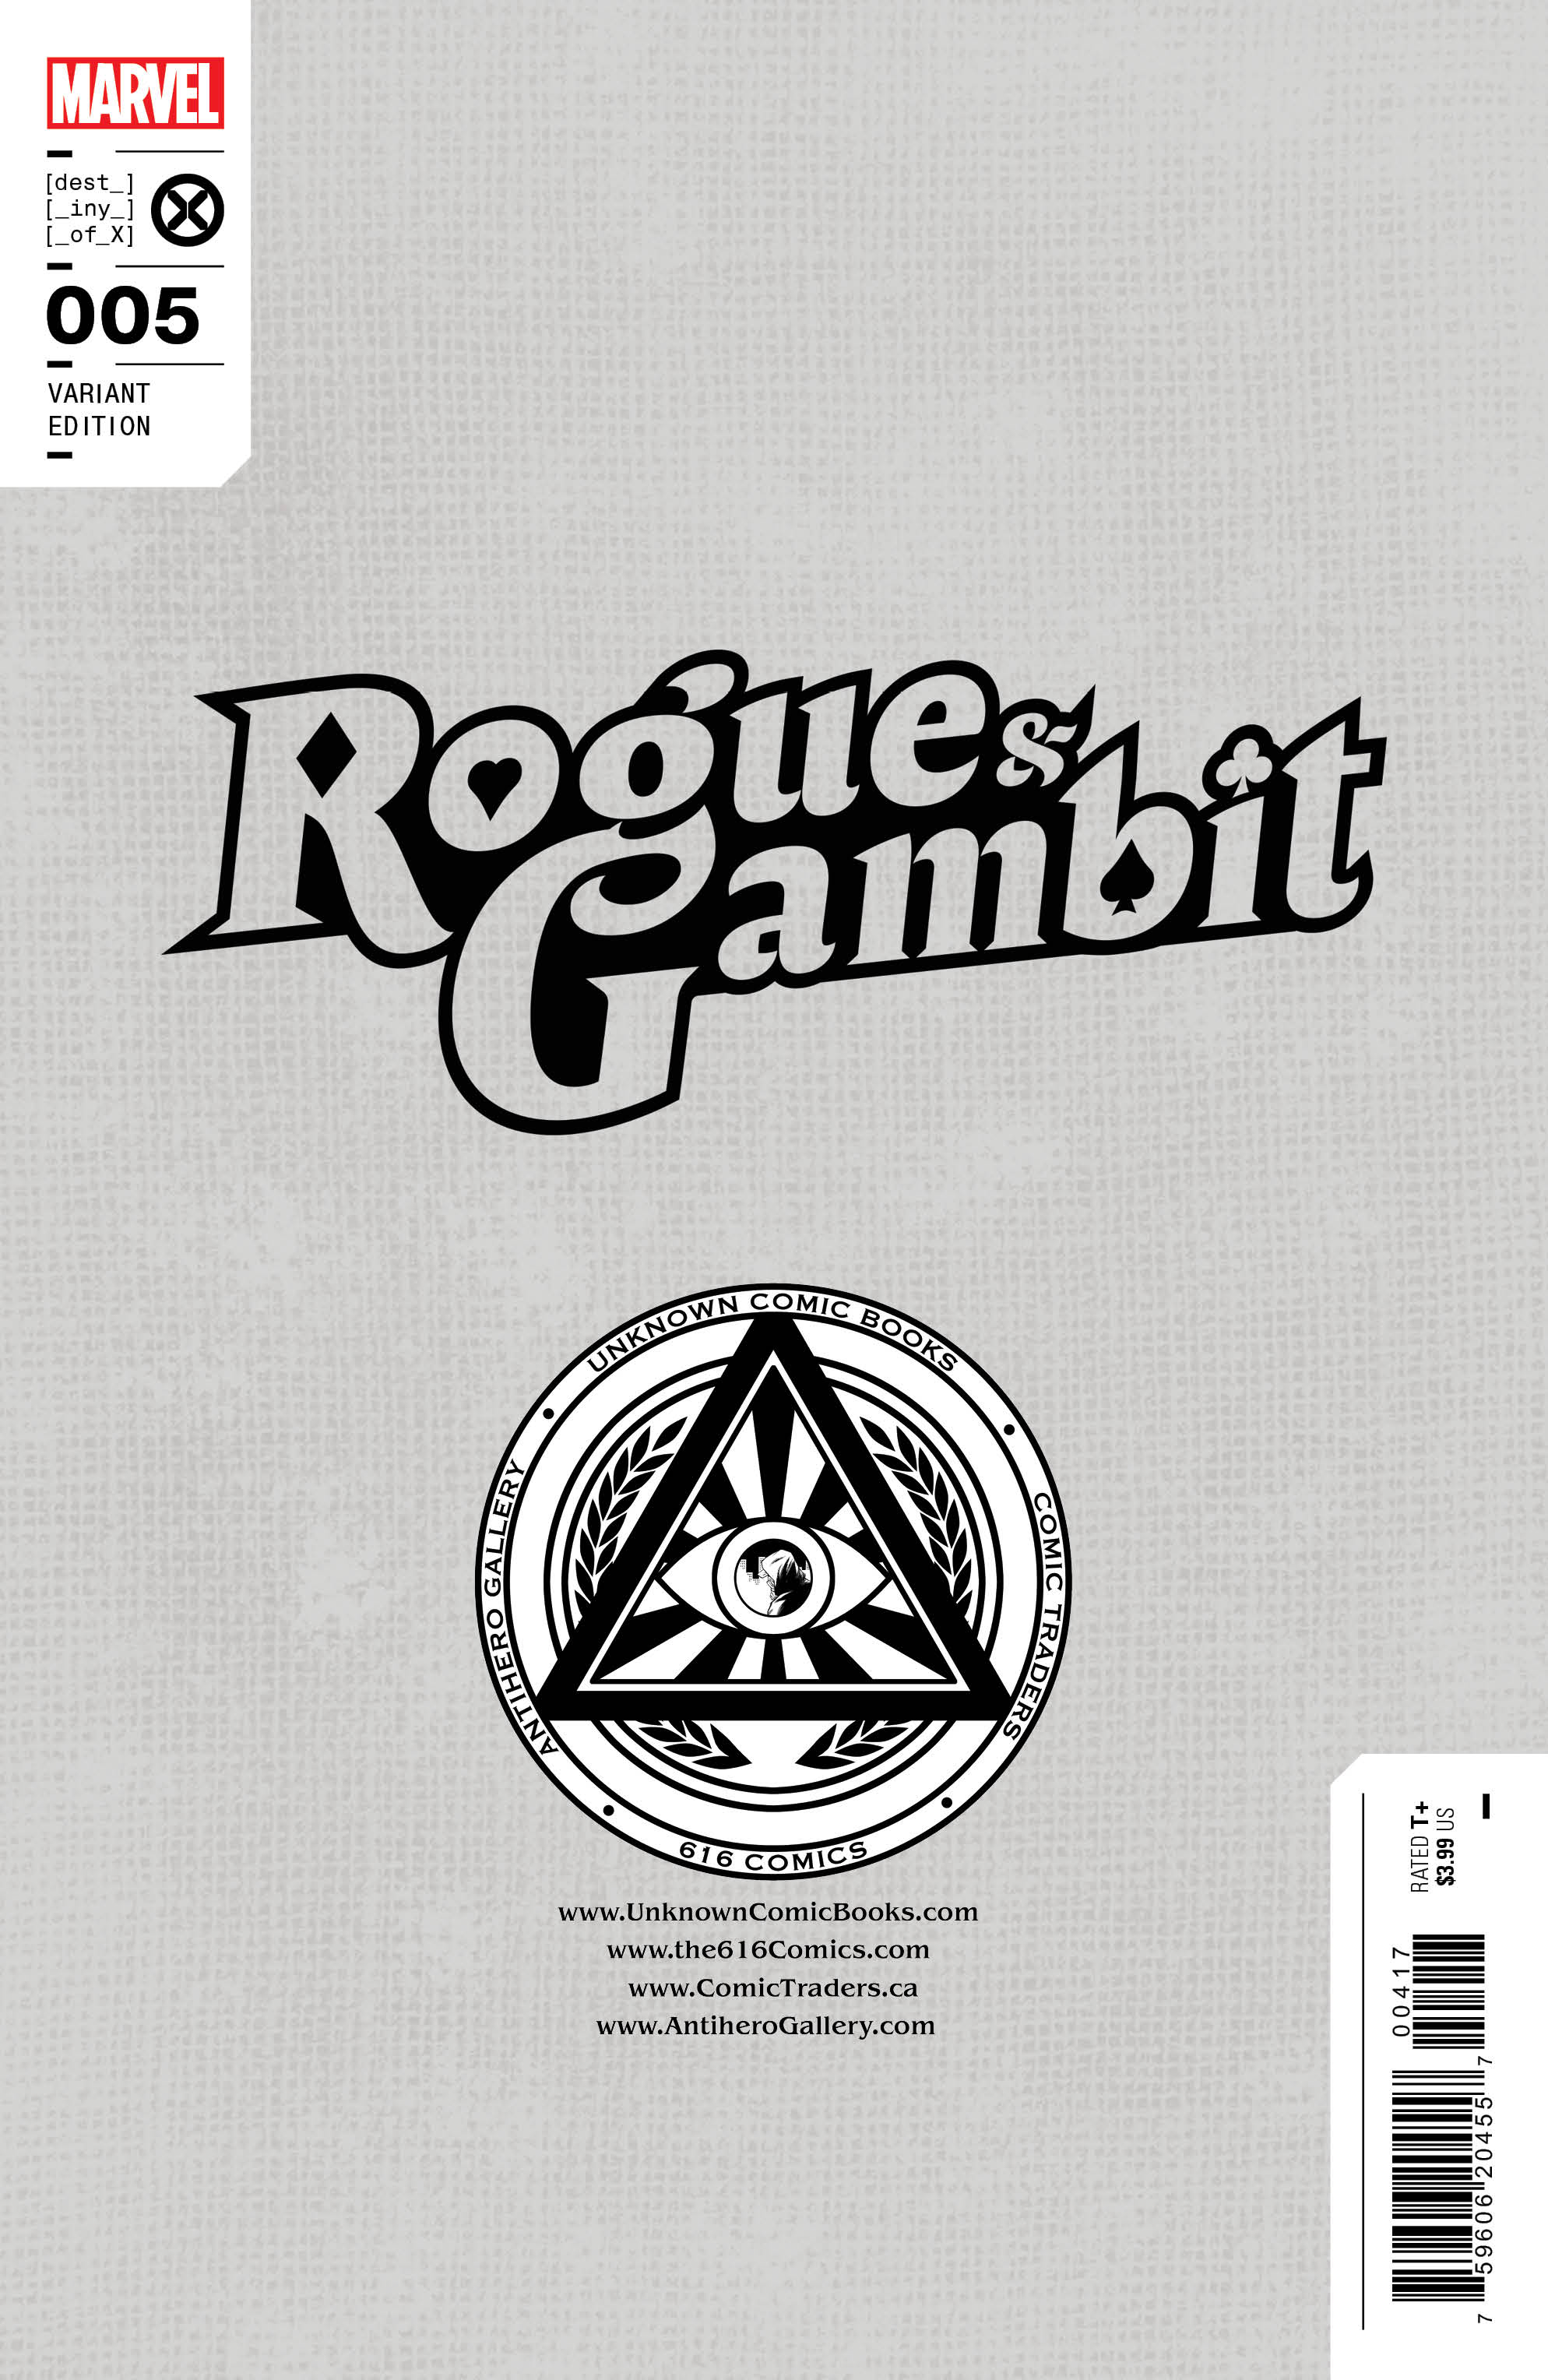 [2 PACK] **FREE TRADE DRESS** ROGUE & GAMBIT #5 UNKNOWN COMICS R1C0 EXCLUSIVE VAR (07/12/2023)